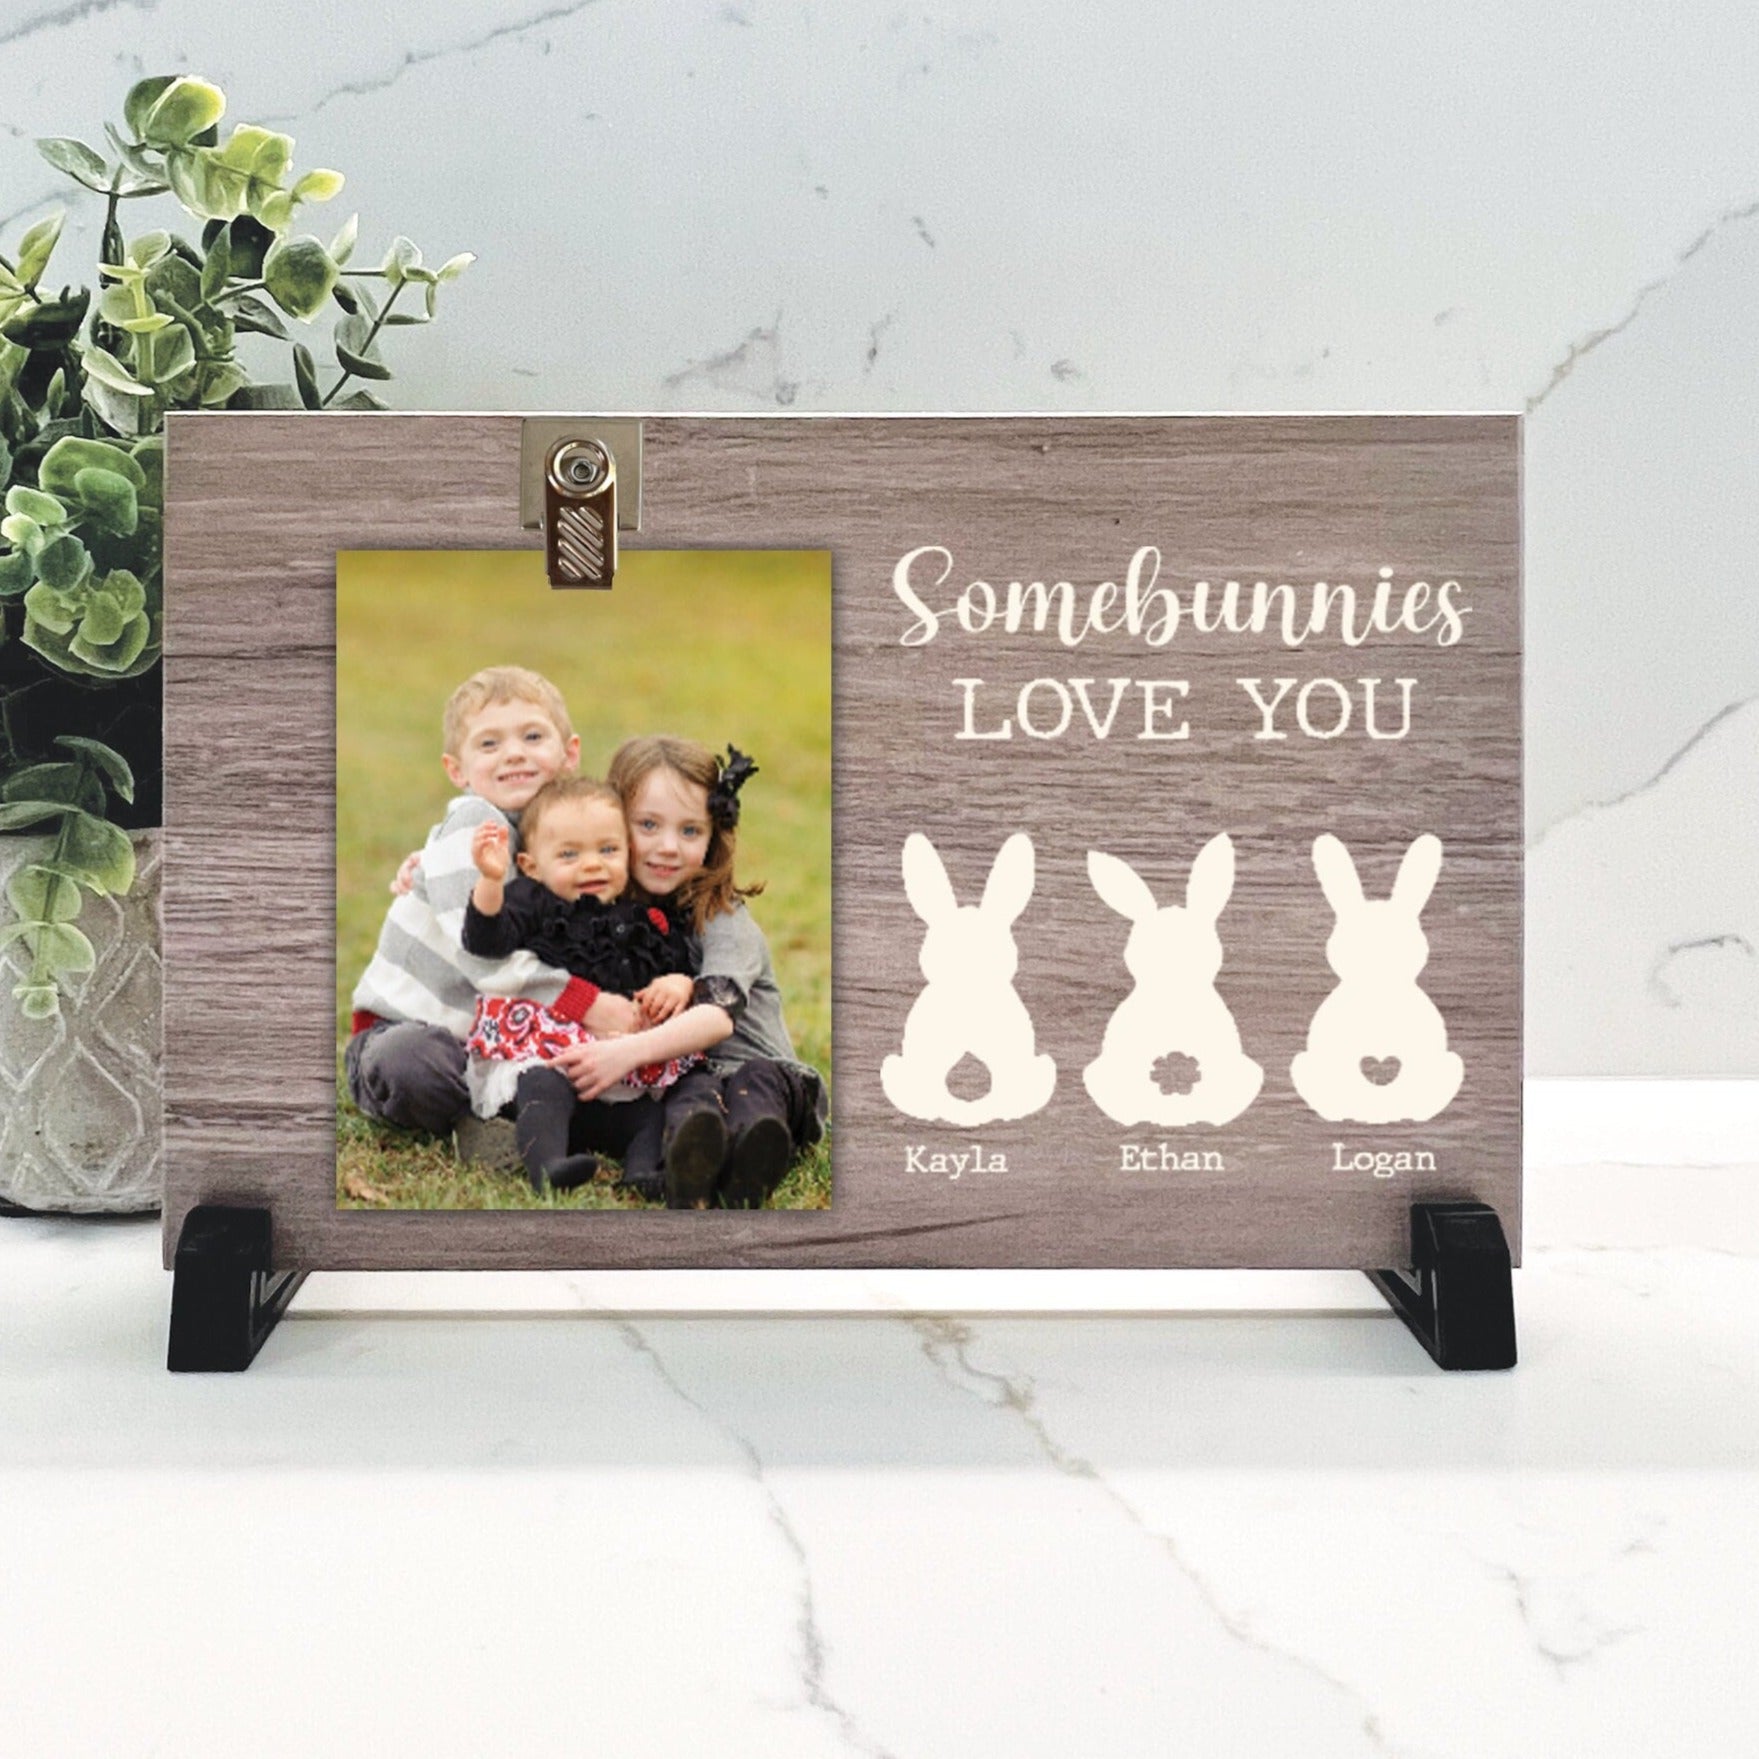 Customize your cherished moments with our Easter Personalized Picture Frame available at www.florida-funshine.com. Create a heartfelt gift for family and friends with free personalization, quick shipping in 1-2 business days, and quality crafted picture frames, portraits, and plaques made in the USA."